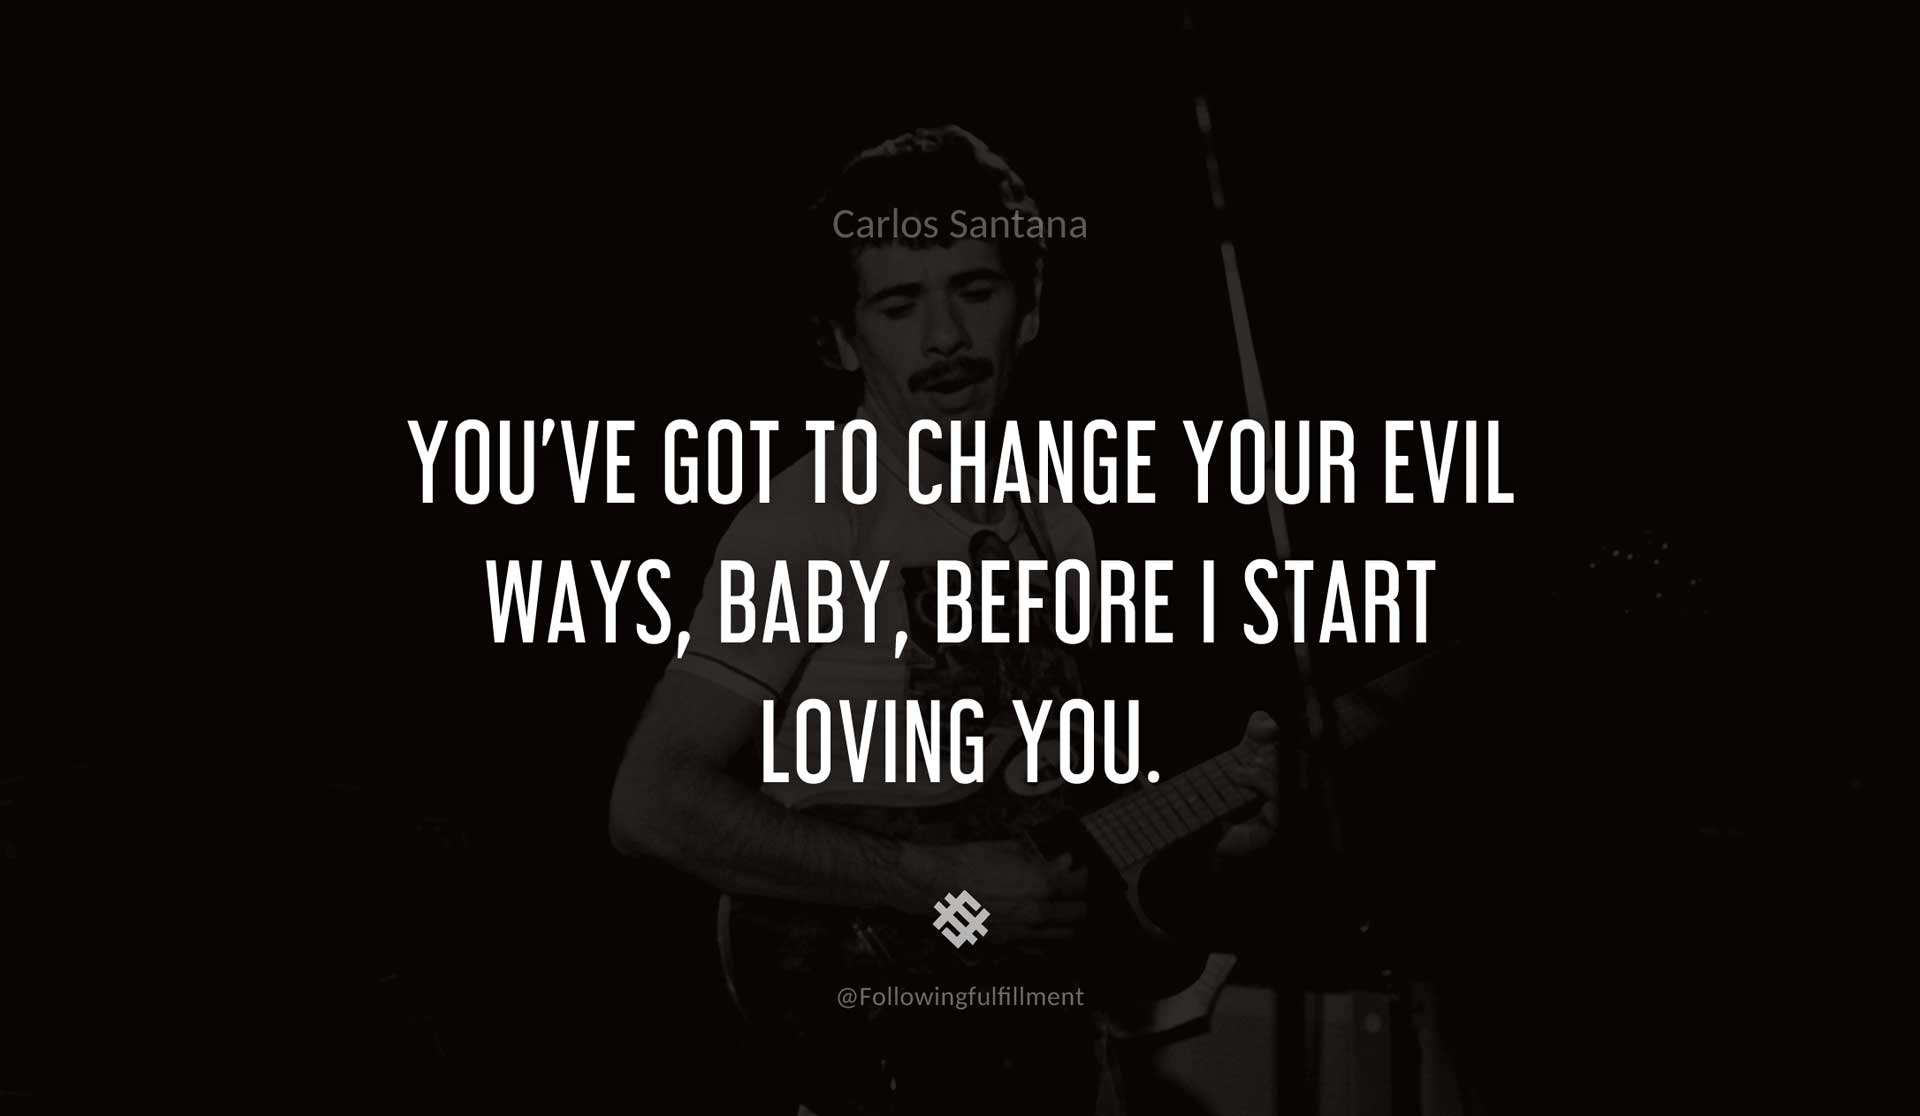 You've-got-to-change-your-evil-ways,-baby,-before-I-start-loving-you.-CARLOS-SANTANA-Quote.jpg